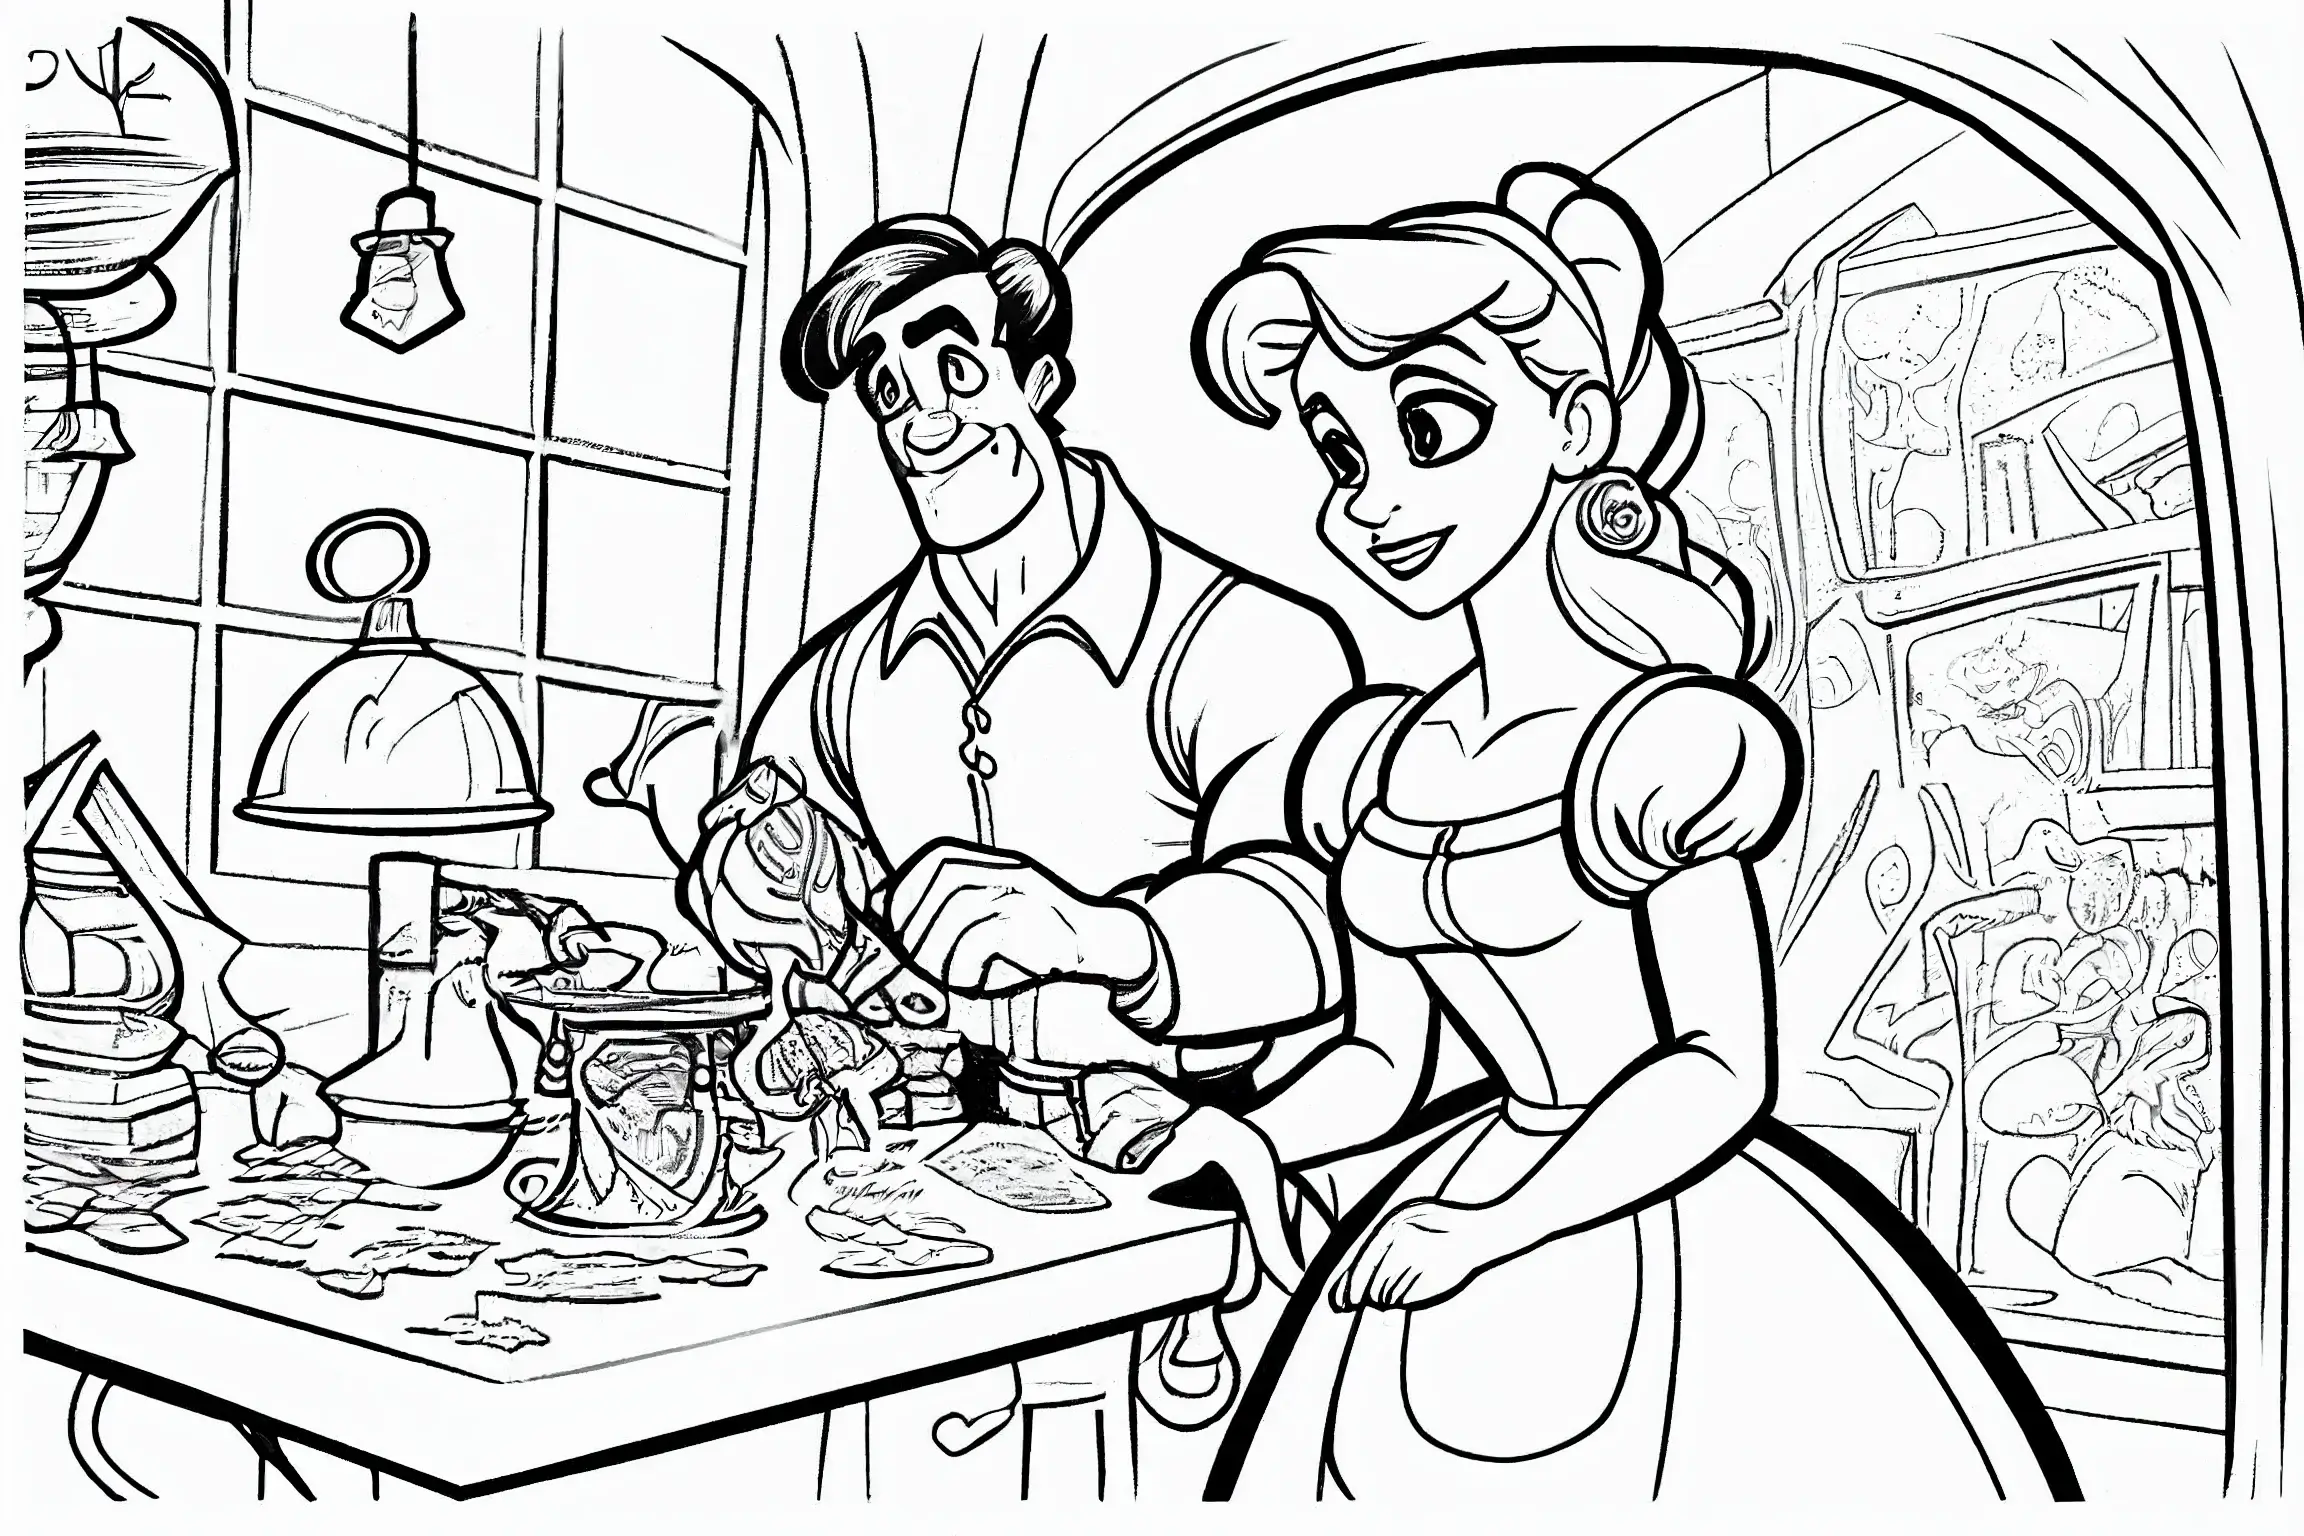 Disney Coloring Pages for Creativity